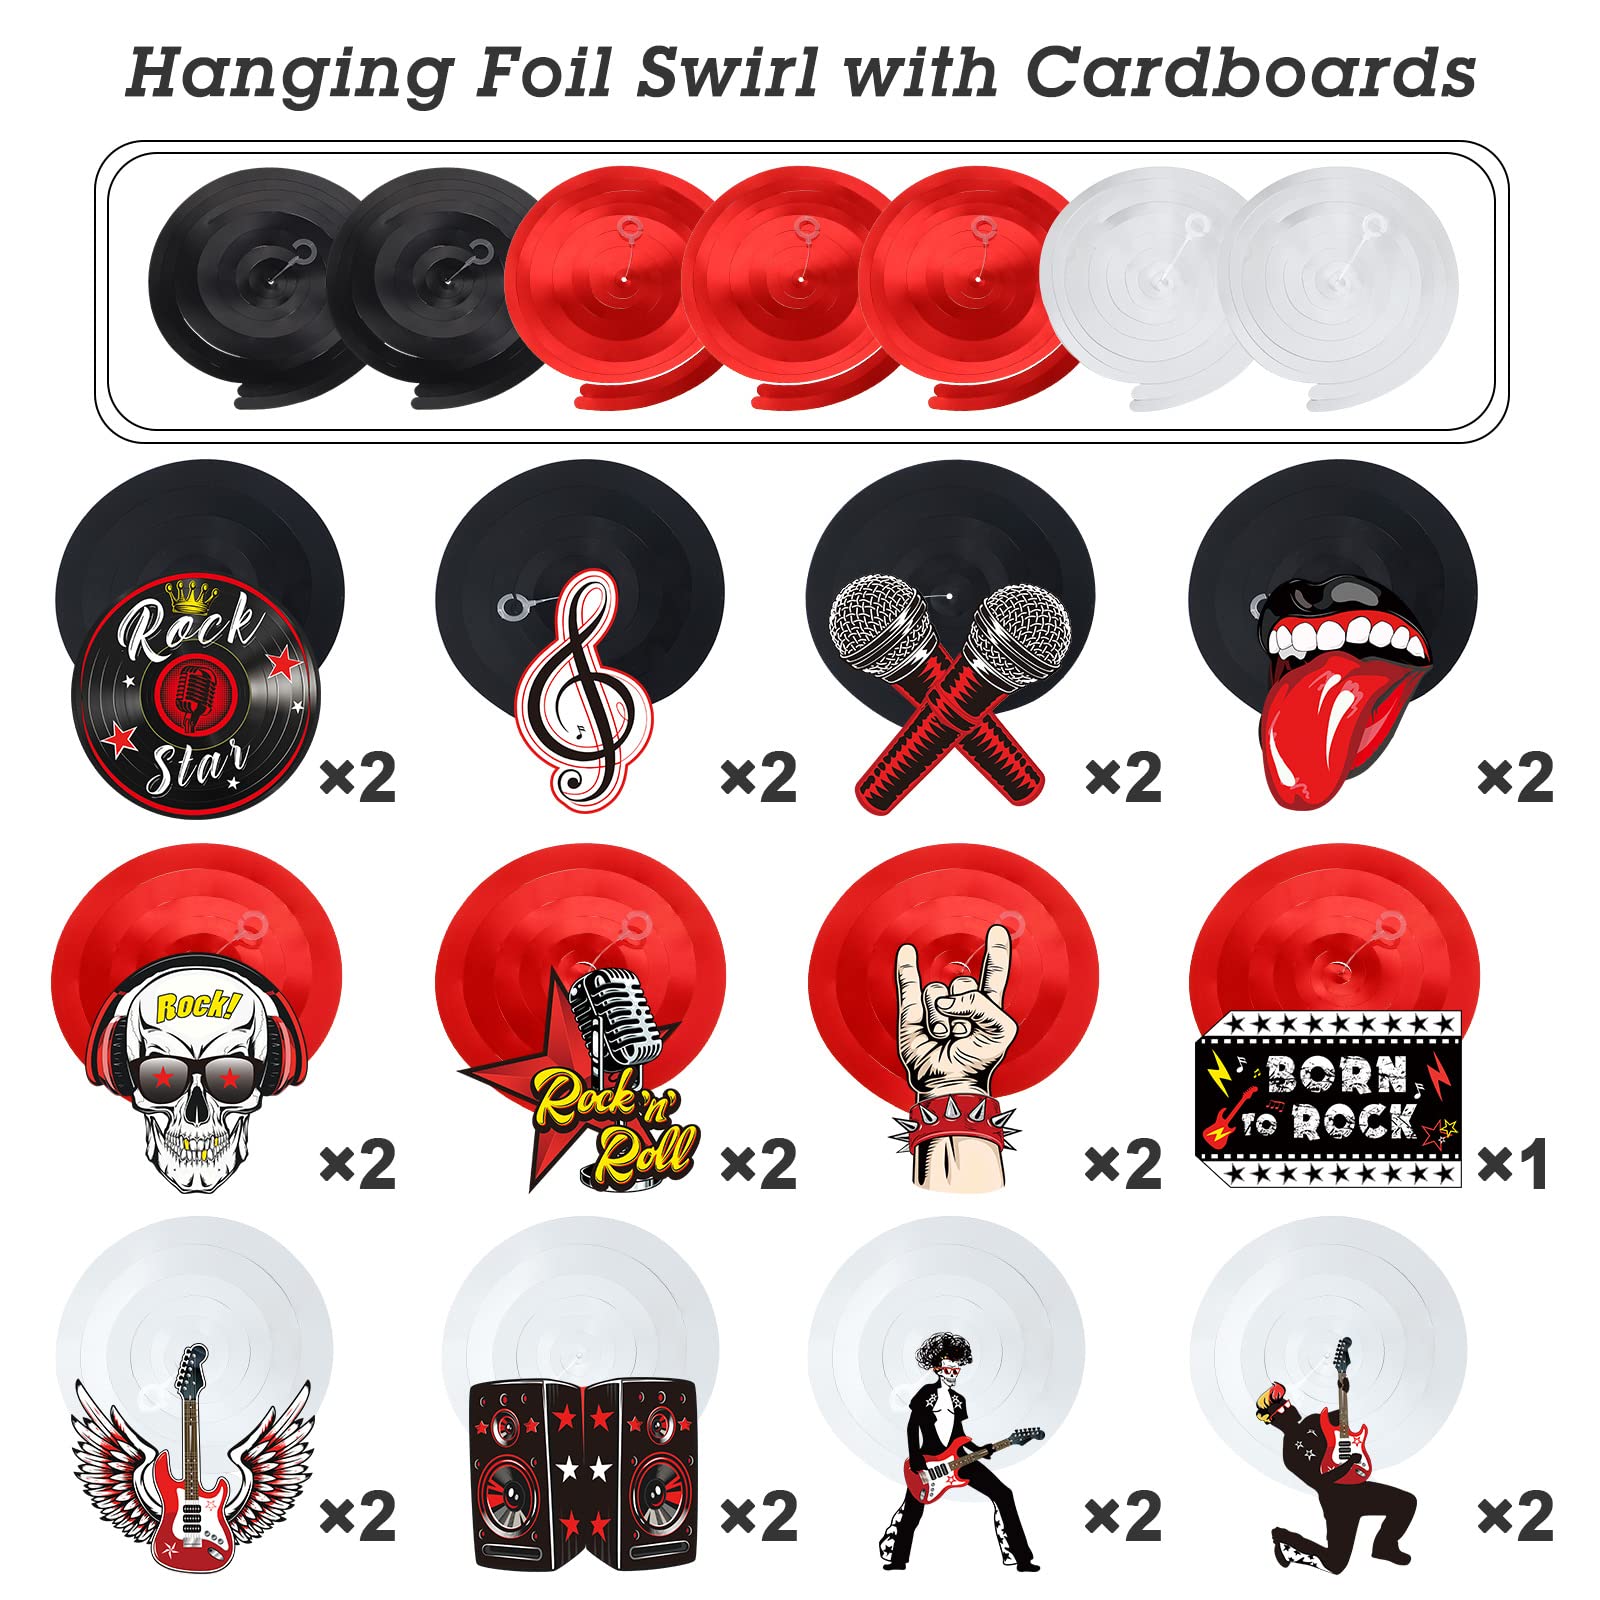 Zonon 53 Pieces Rock and Roll Theme Party Decorations, Guitar Record Sign Rock Star Music Party Hanging Swirls Ceiling Decor for 50's 60's Rock Music Theme Party Favors Supplies